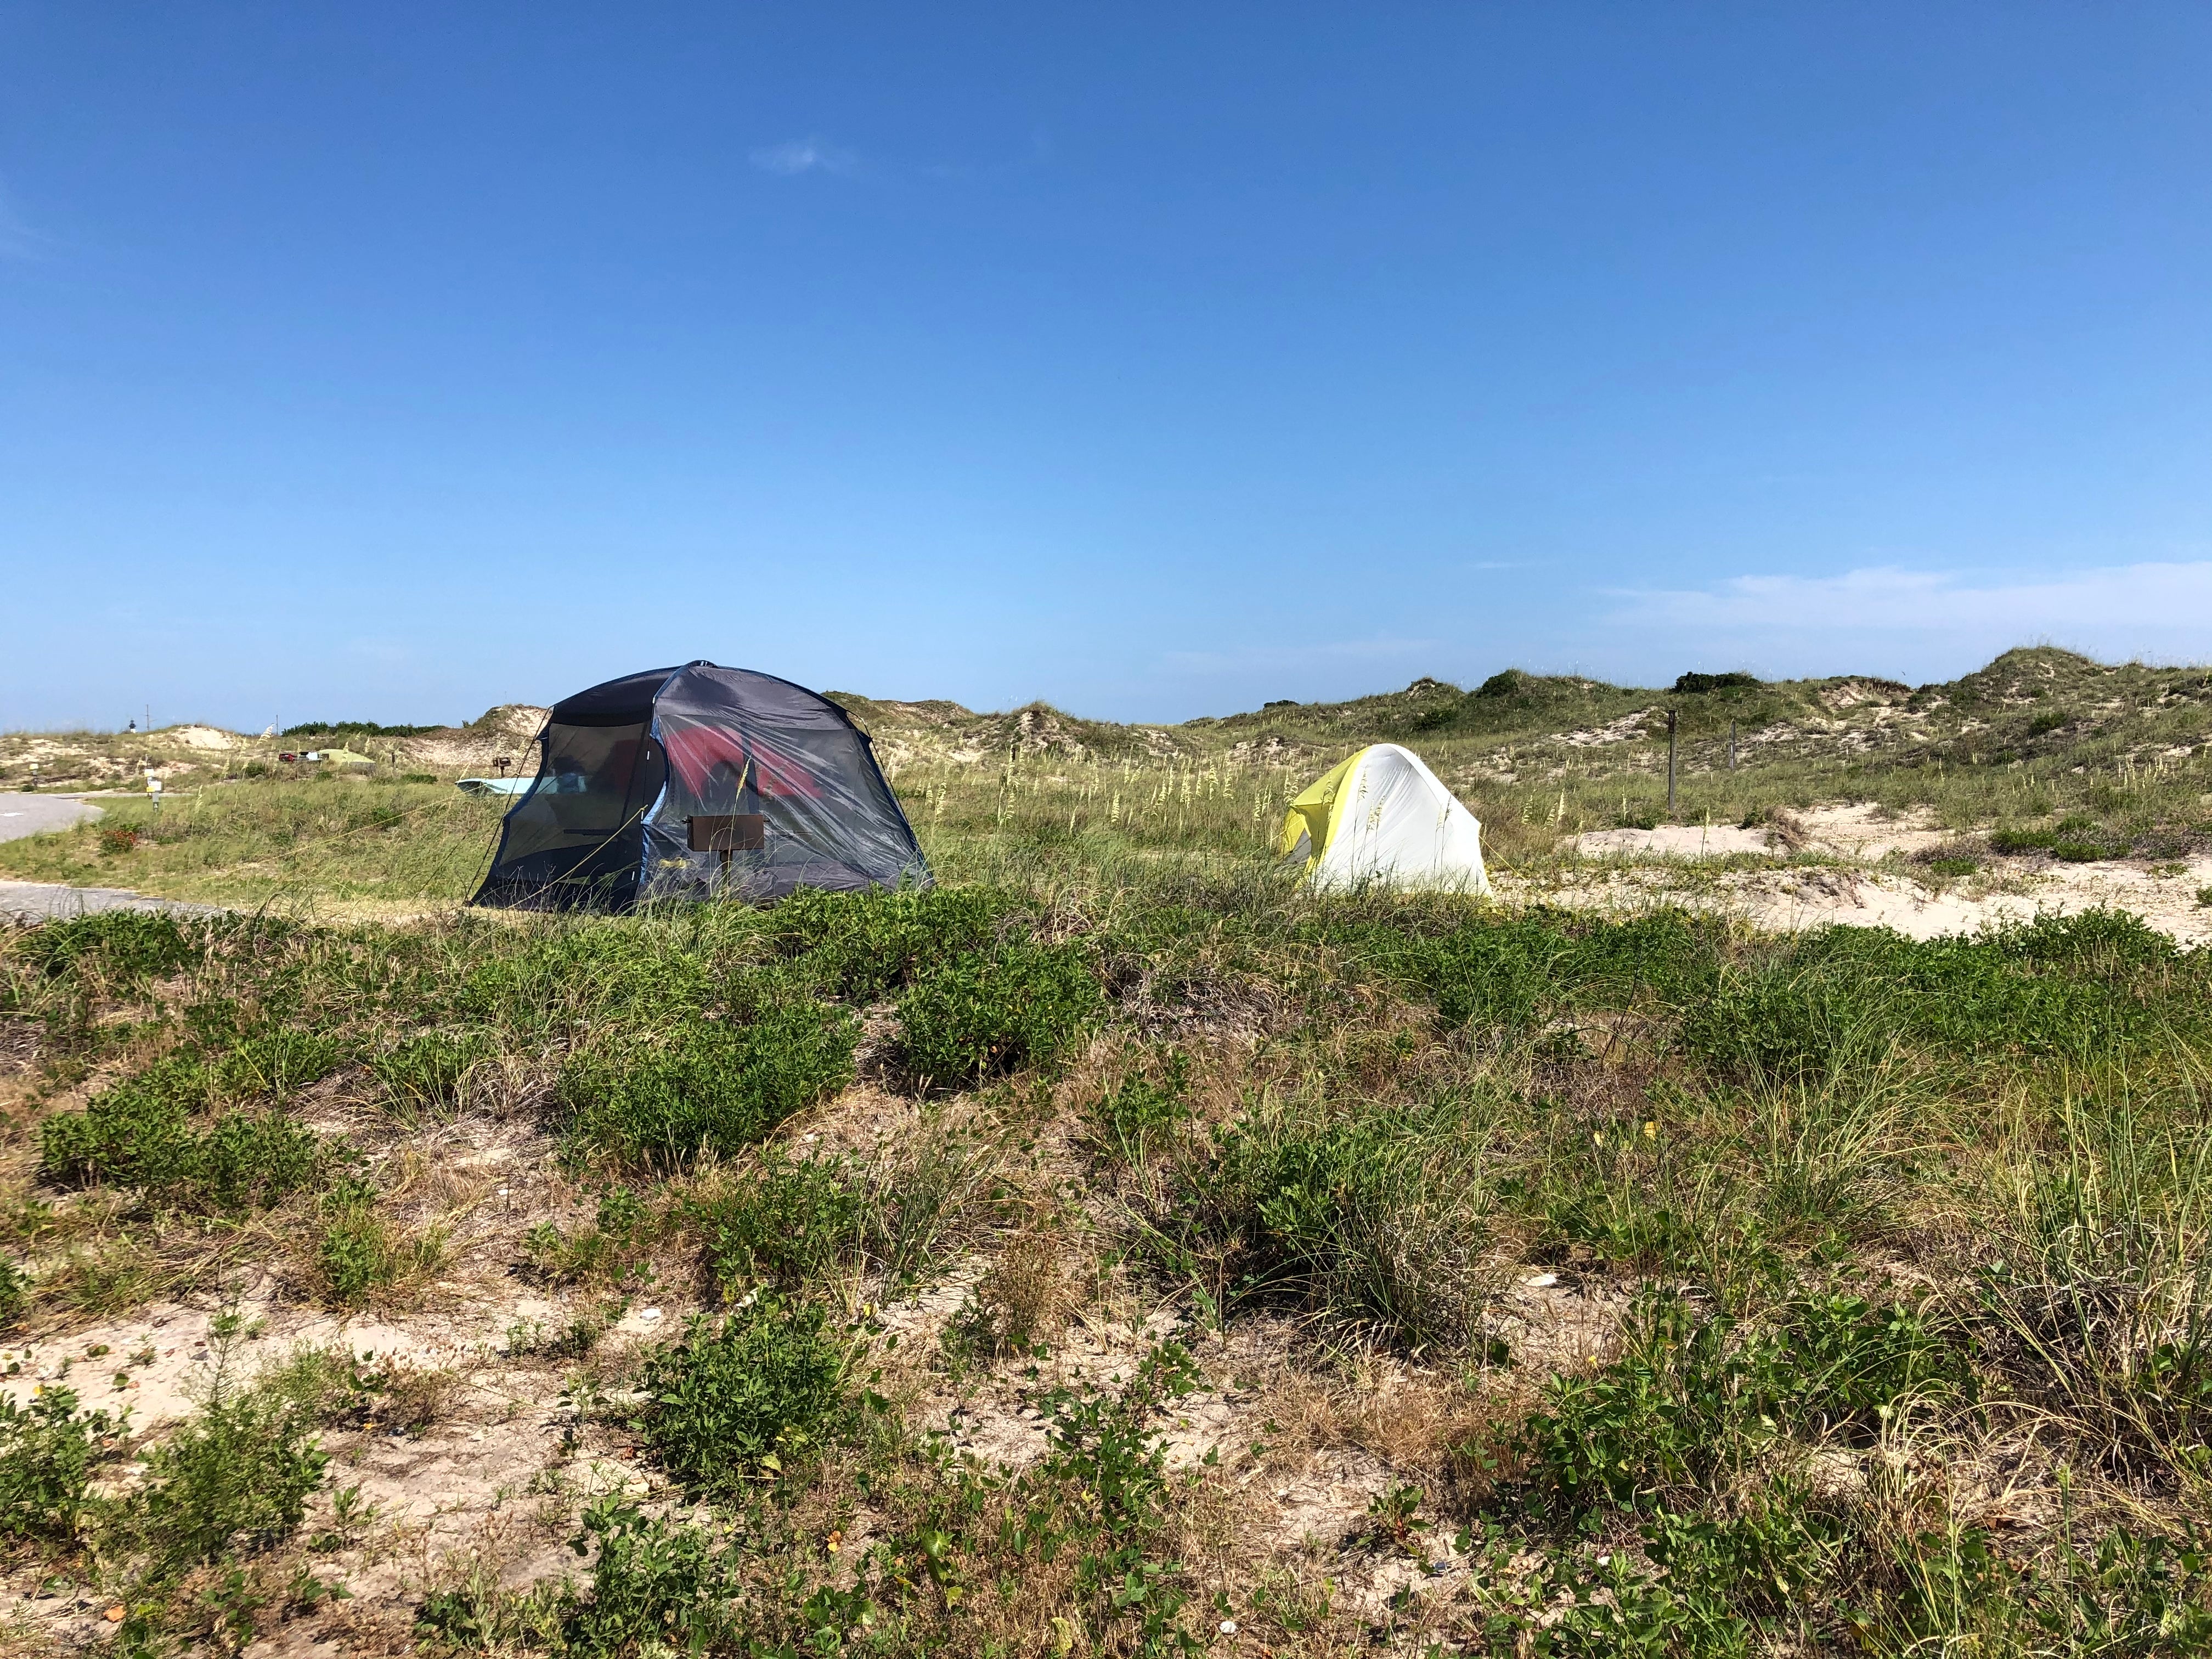 Odd-numbered sites on the beach side of the tent loop have a bit more space.